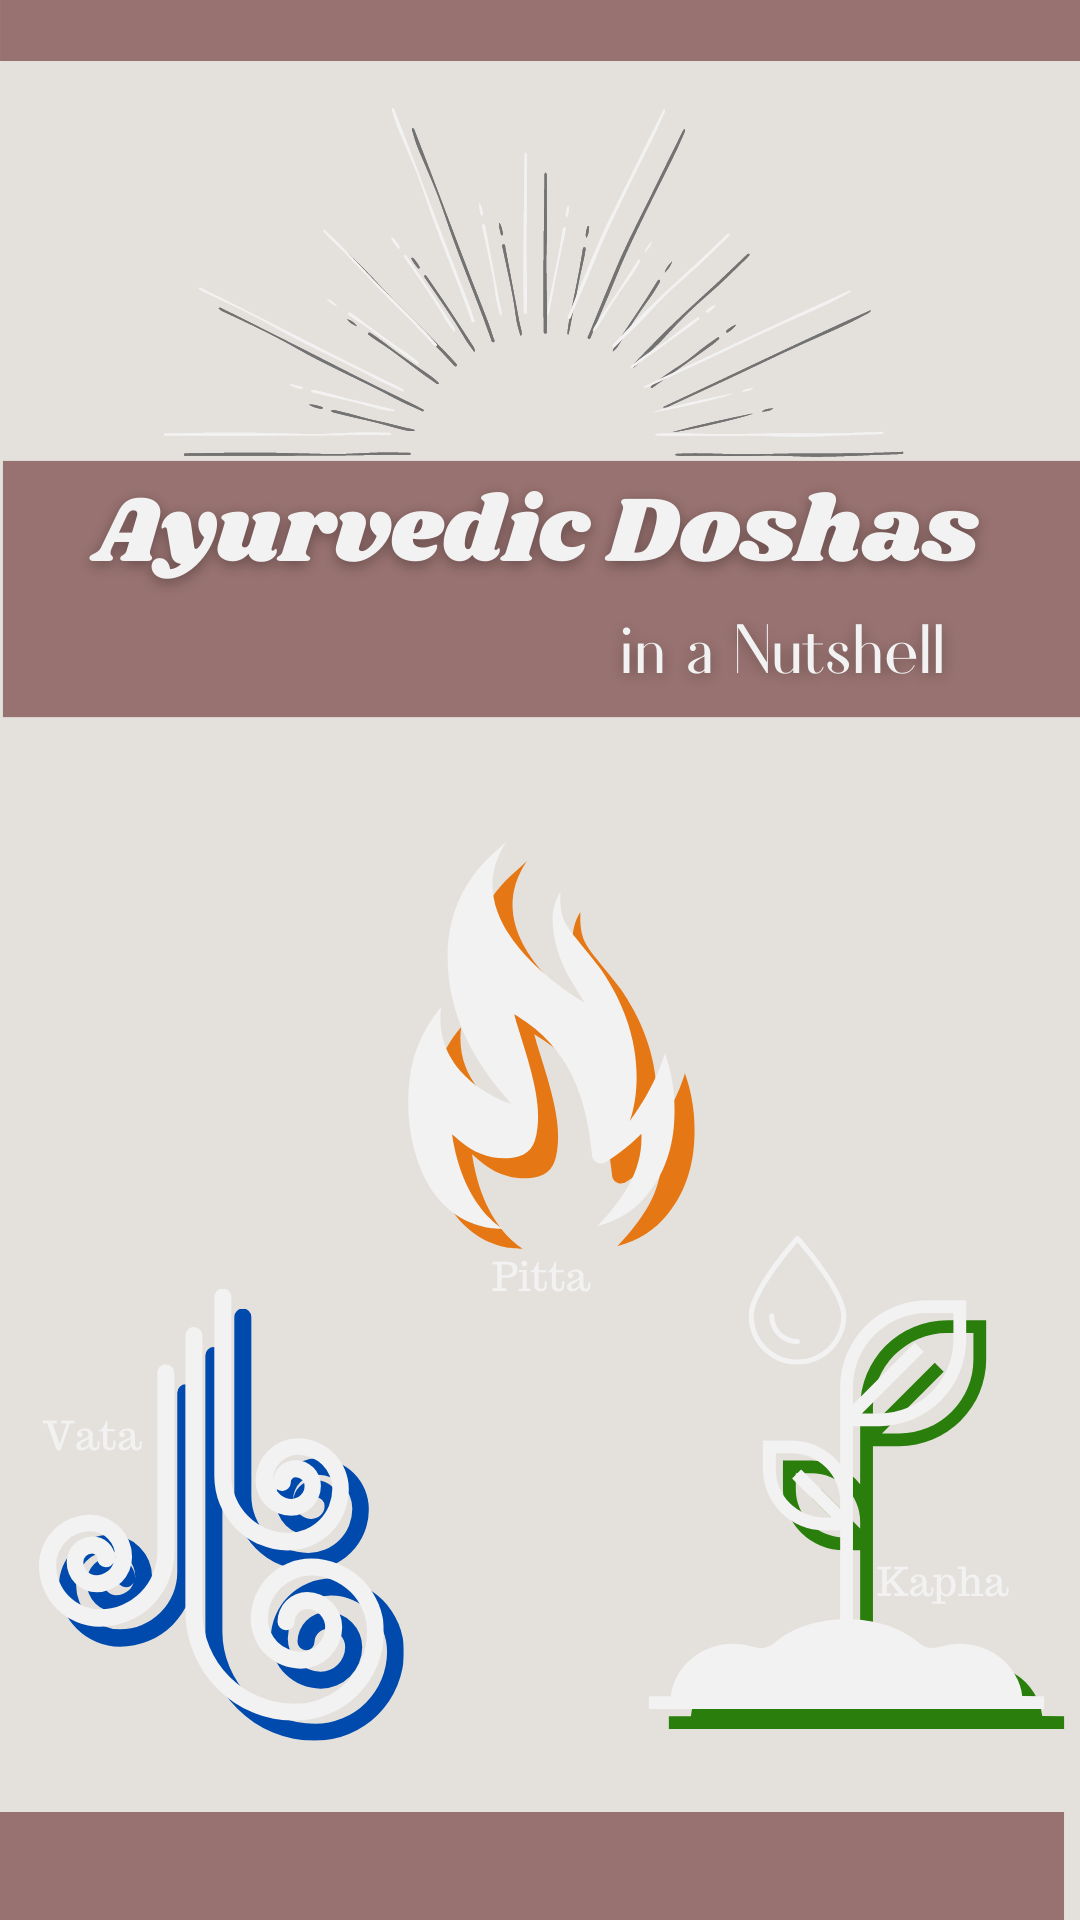 What are the Ayurvedic Doshas? Get their description in nutshell.